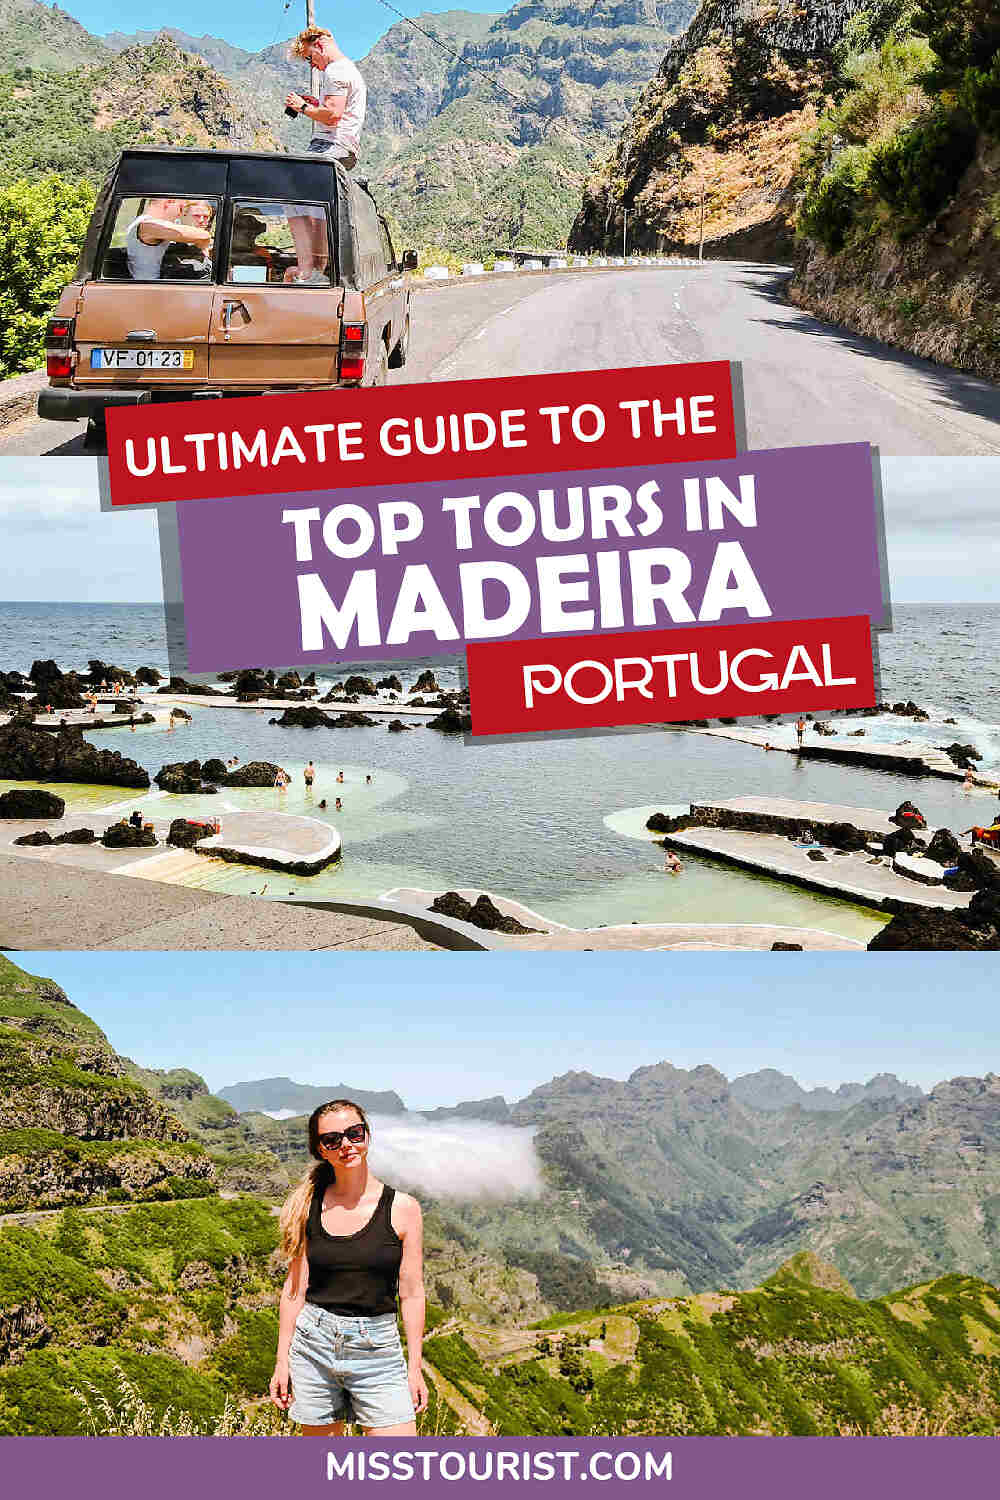 Tours in Madeira PIN 2